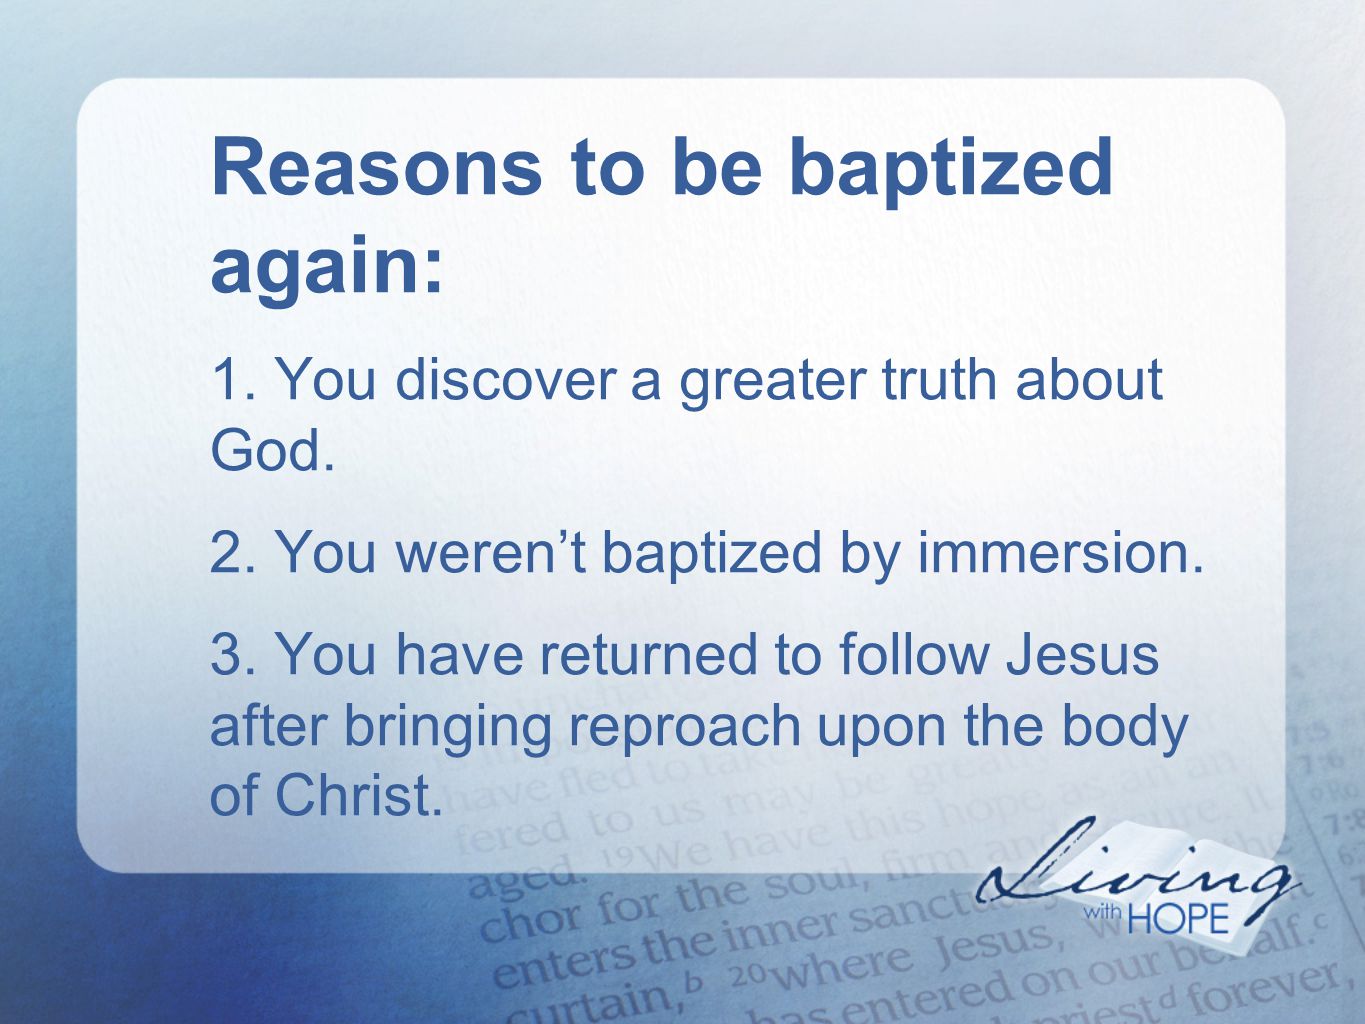 Reasons to be baptized again: 1. You discover a greater truth about God.